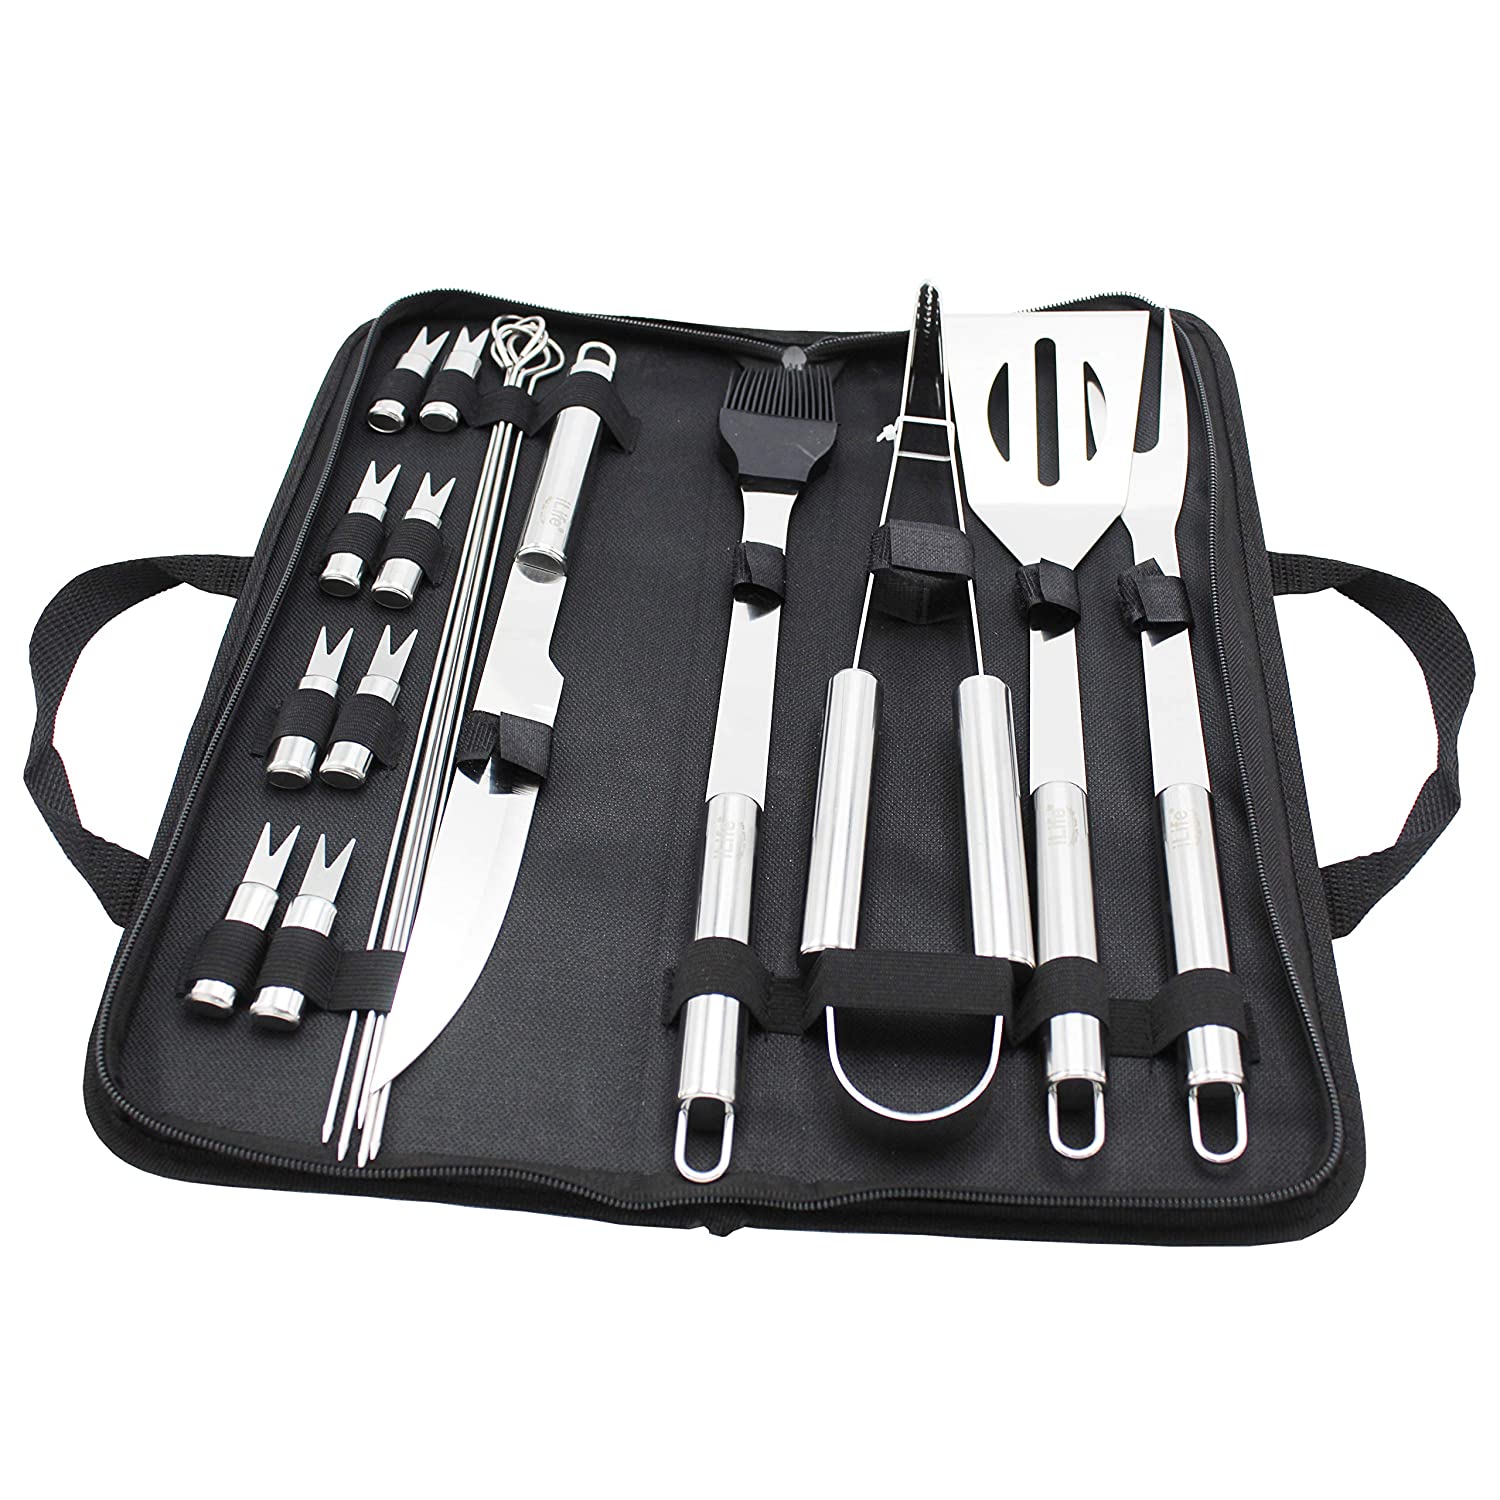 iLife BBQ Tools Set, Stainless Steel Barbecue Accessories with Storage Bags, Complete Outdoor Barbecue Grill Utensils Set, for Outdoor Picnic, Camping, Grilling (18 Pieces)